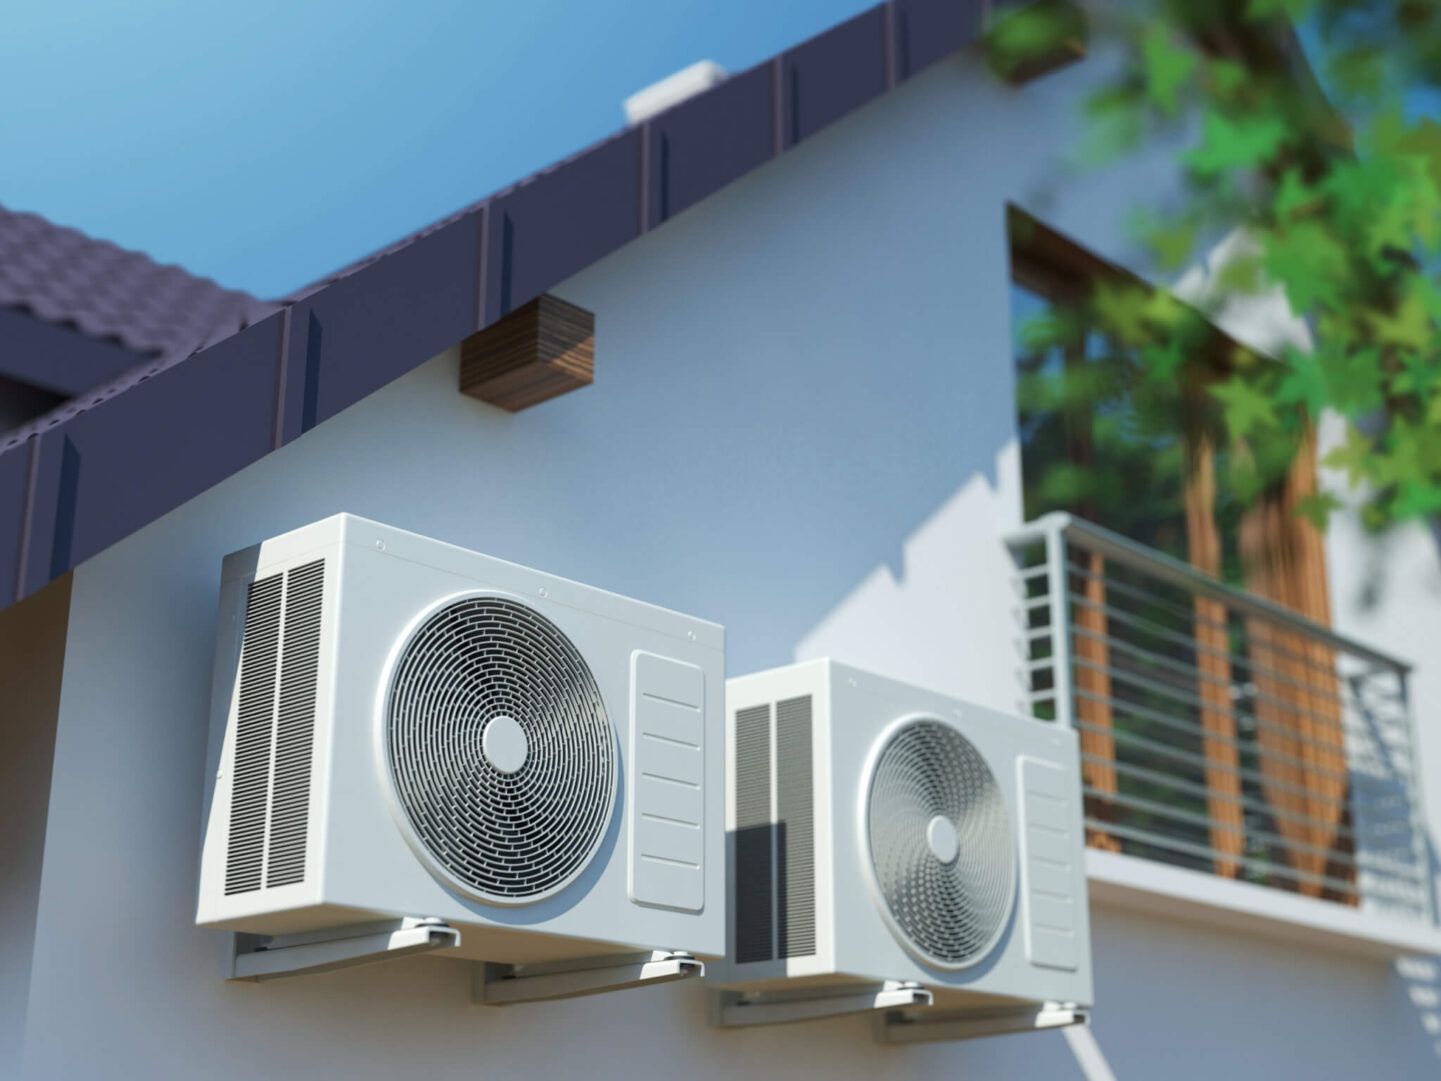 How To Block Air Conditioner Noise